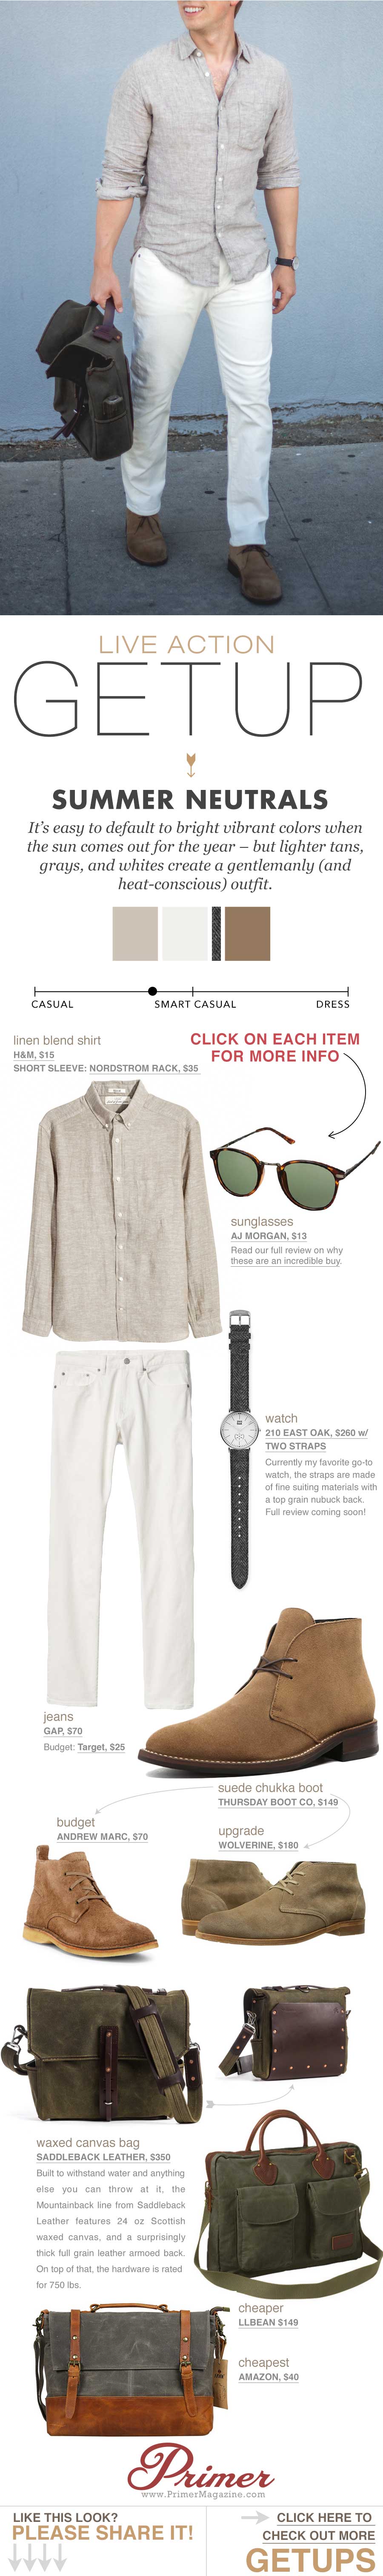 men's summer outfit ideas   white jeans